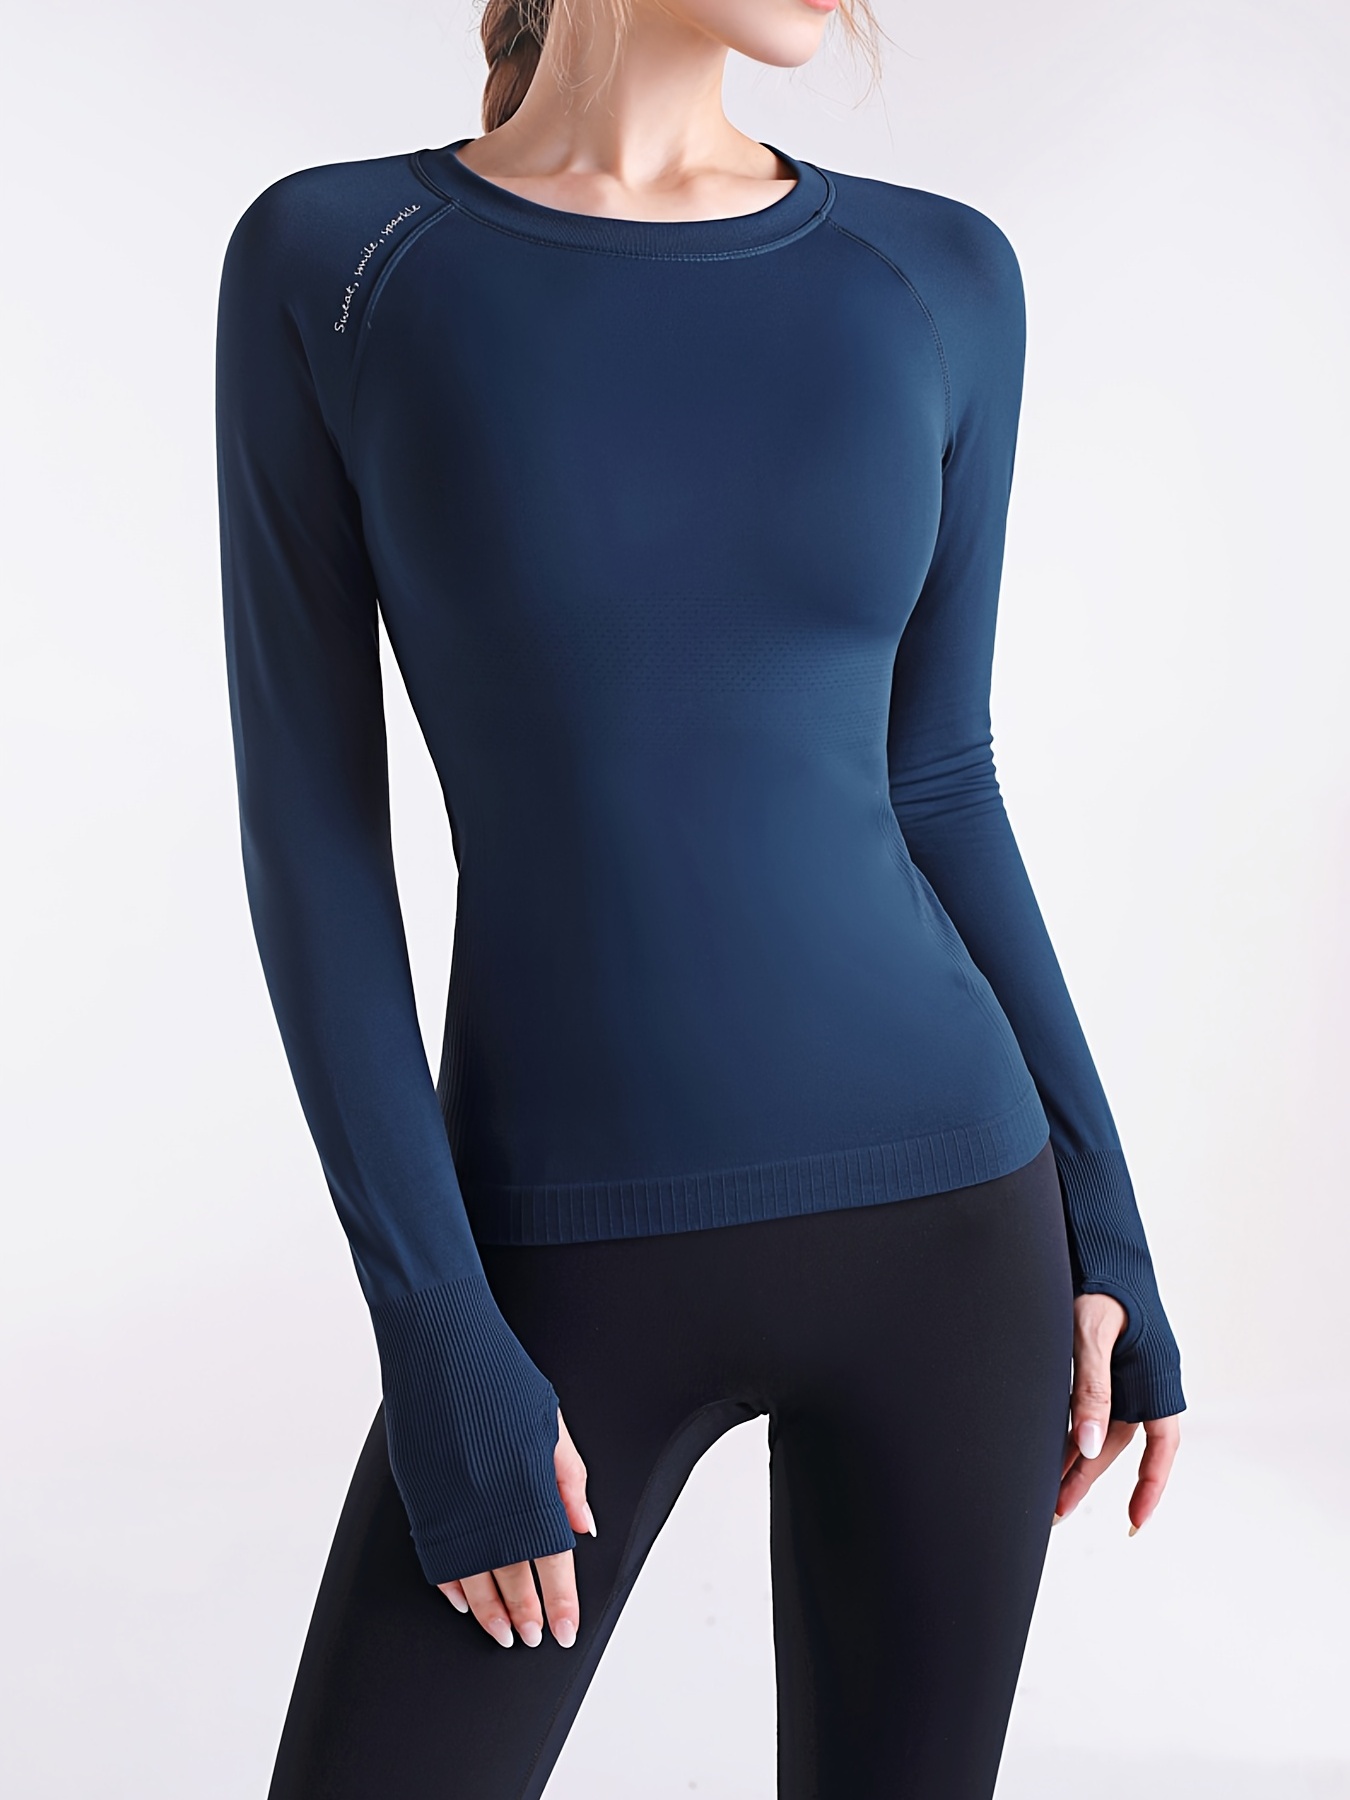 Women Long Sleeve Sport Shirts Girls Elastic Yoga Top Fitness T-shirt  Clothing Quickly Dry Fit Gym Sportswear Workout